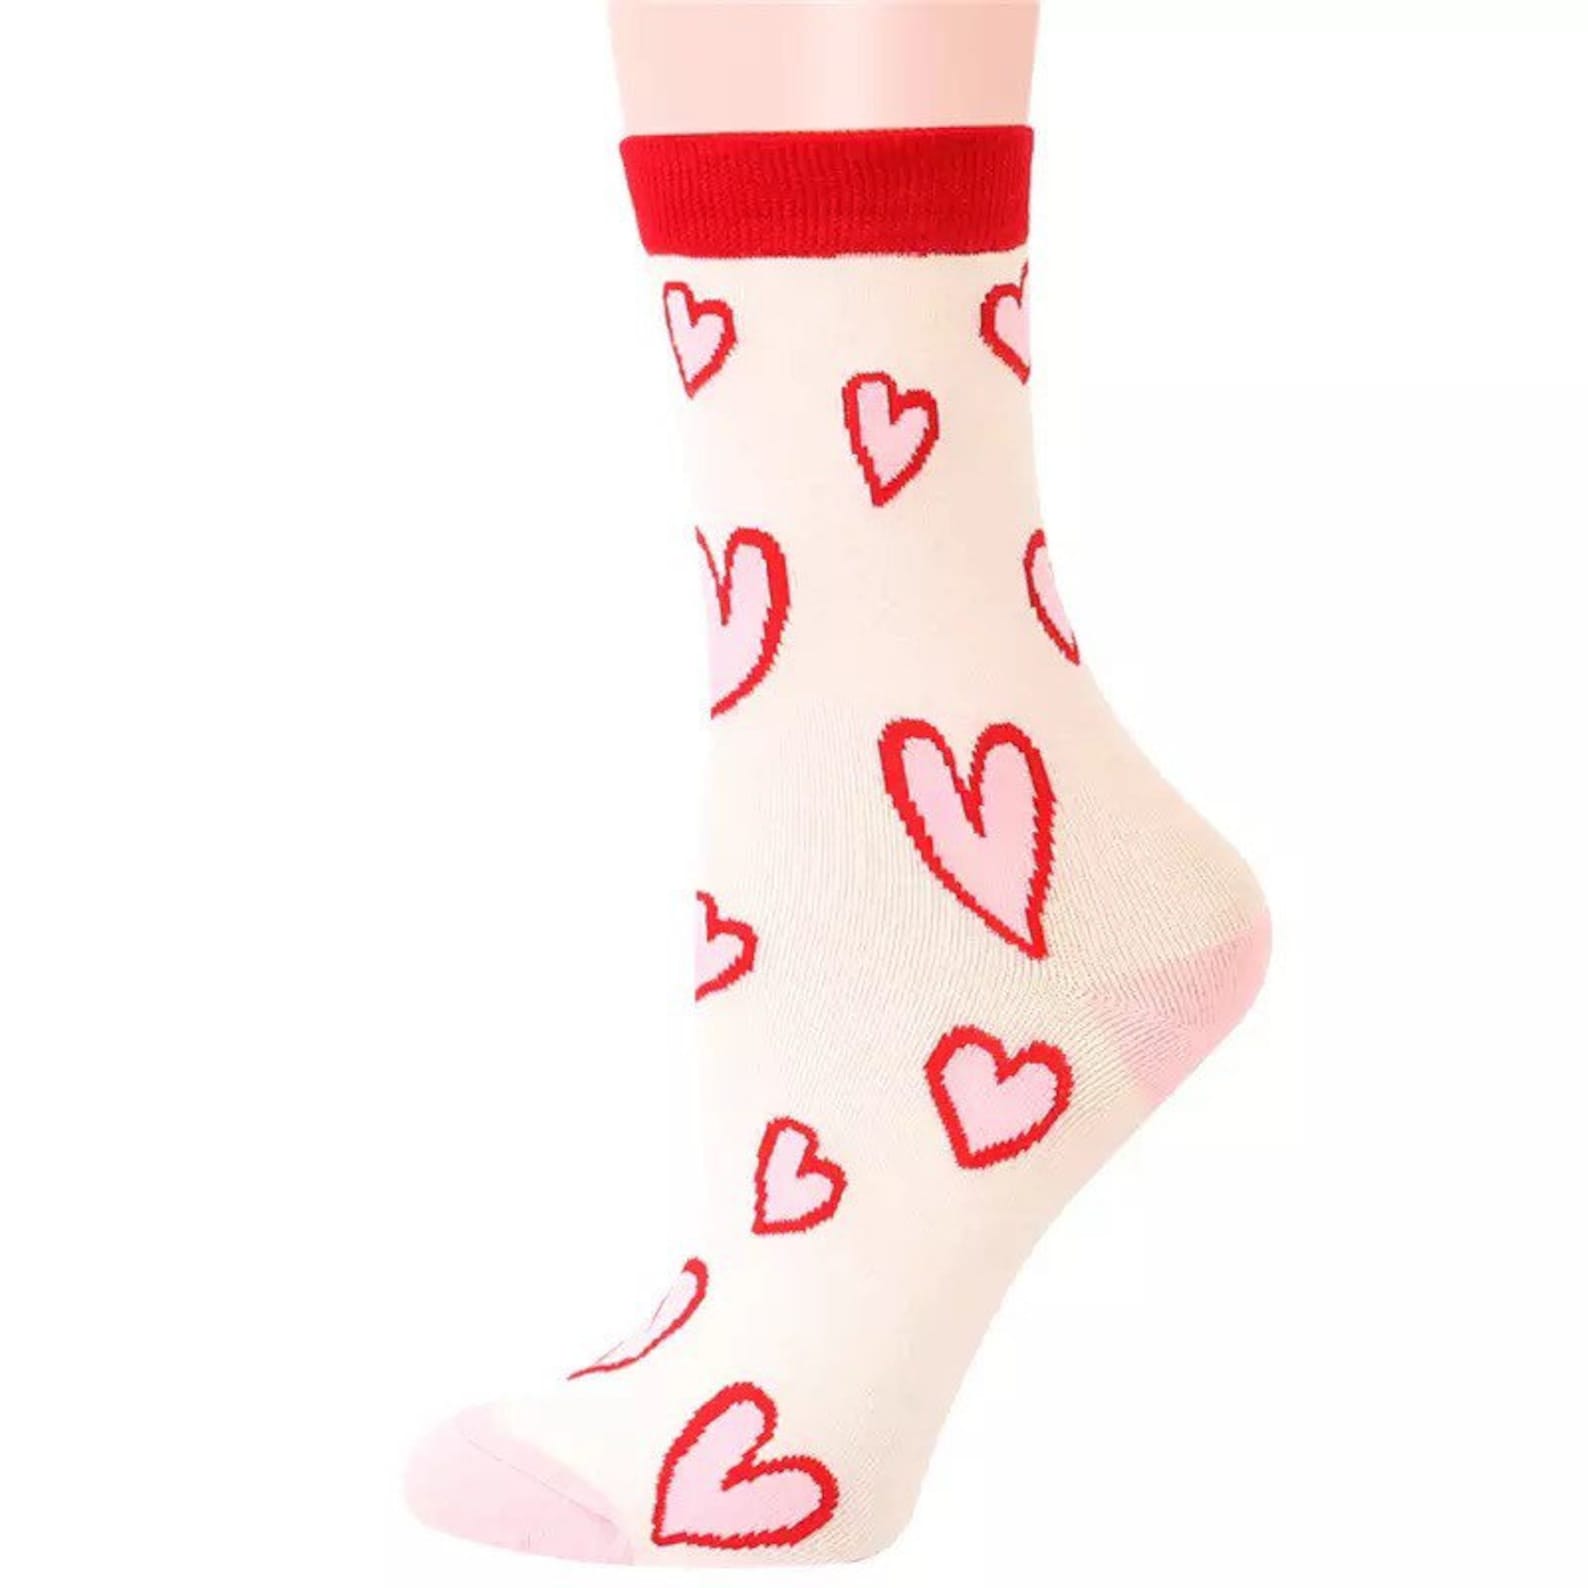 Cute Heart Pink and White Cotton Socks Funky Socks Cotton - Etsy UK